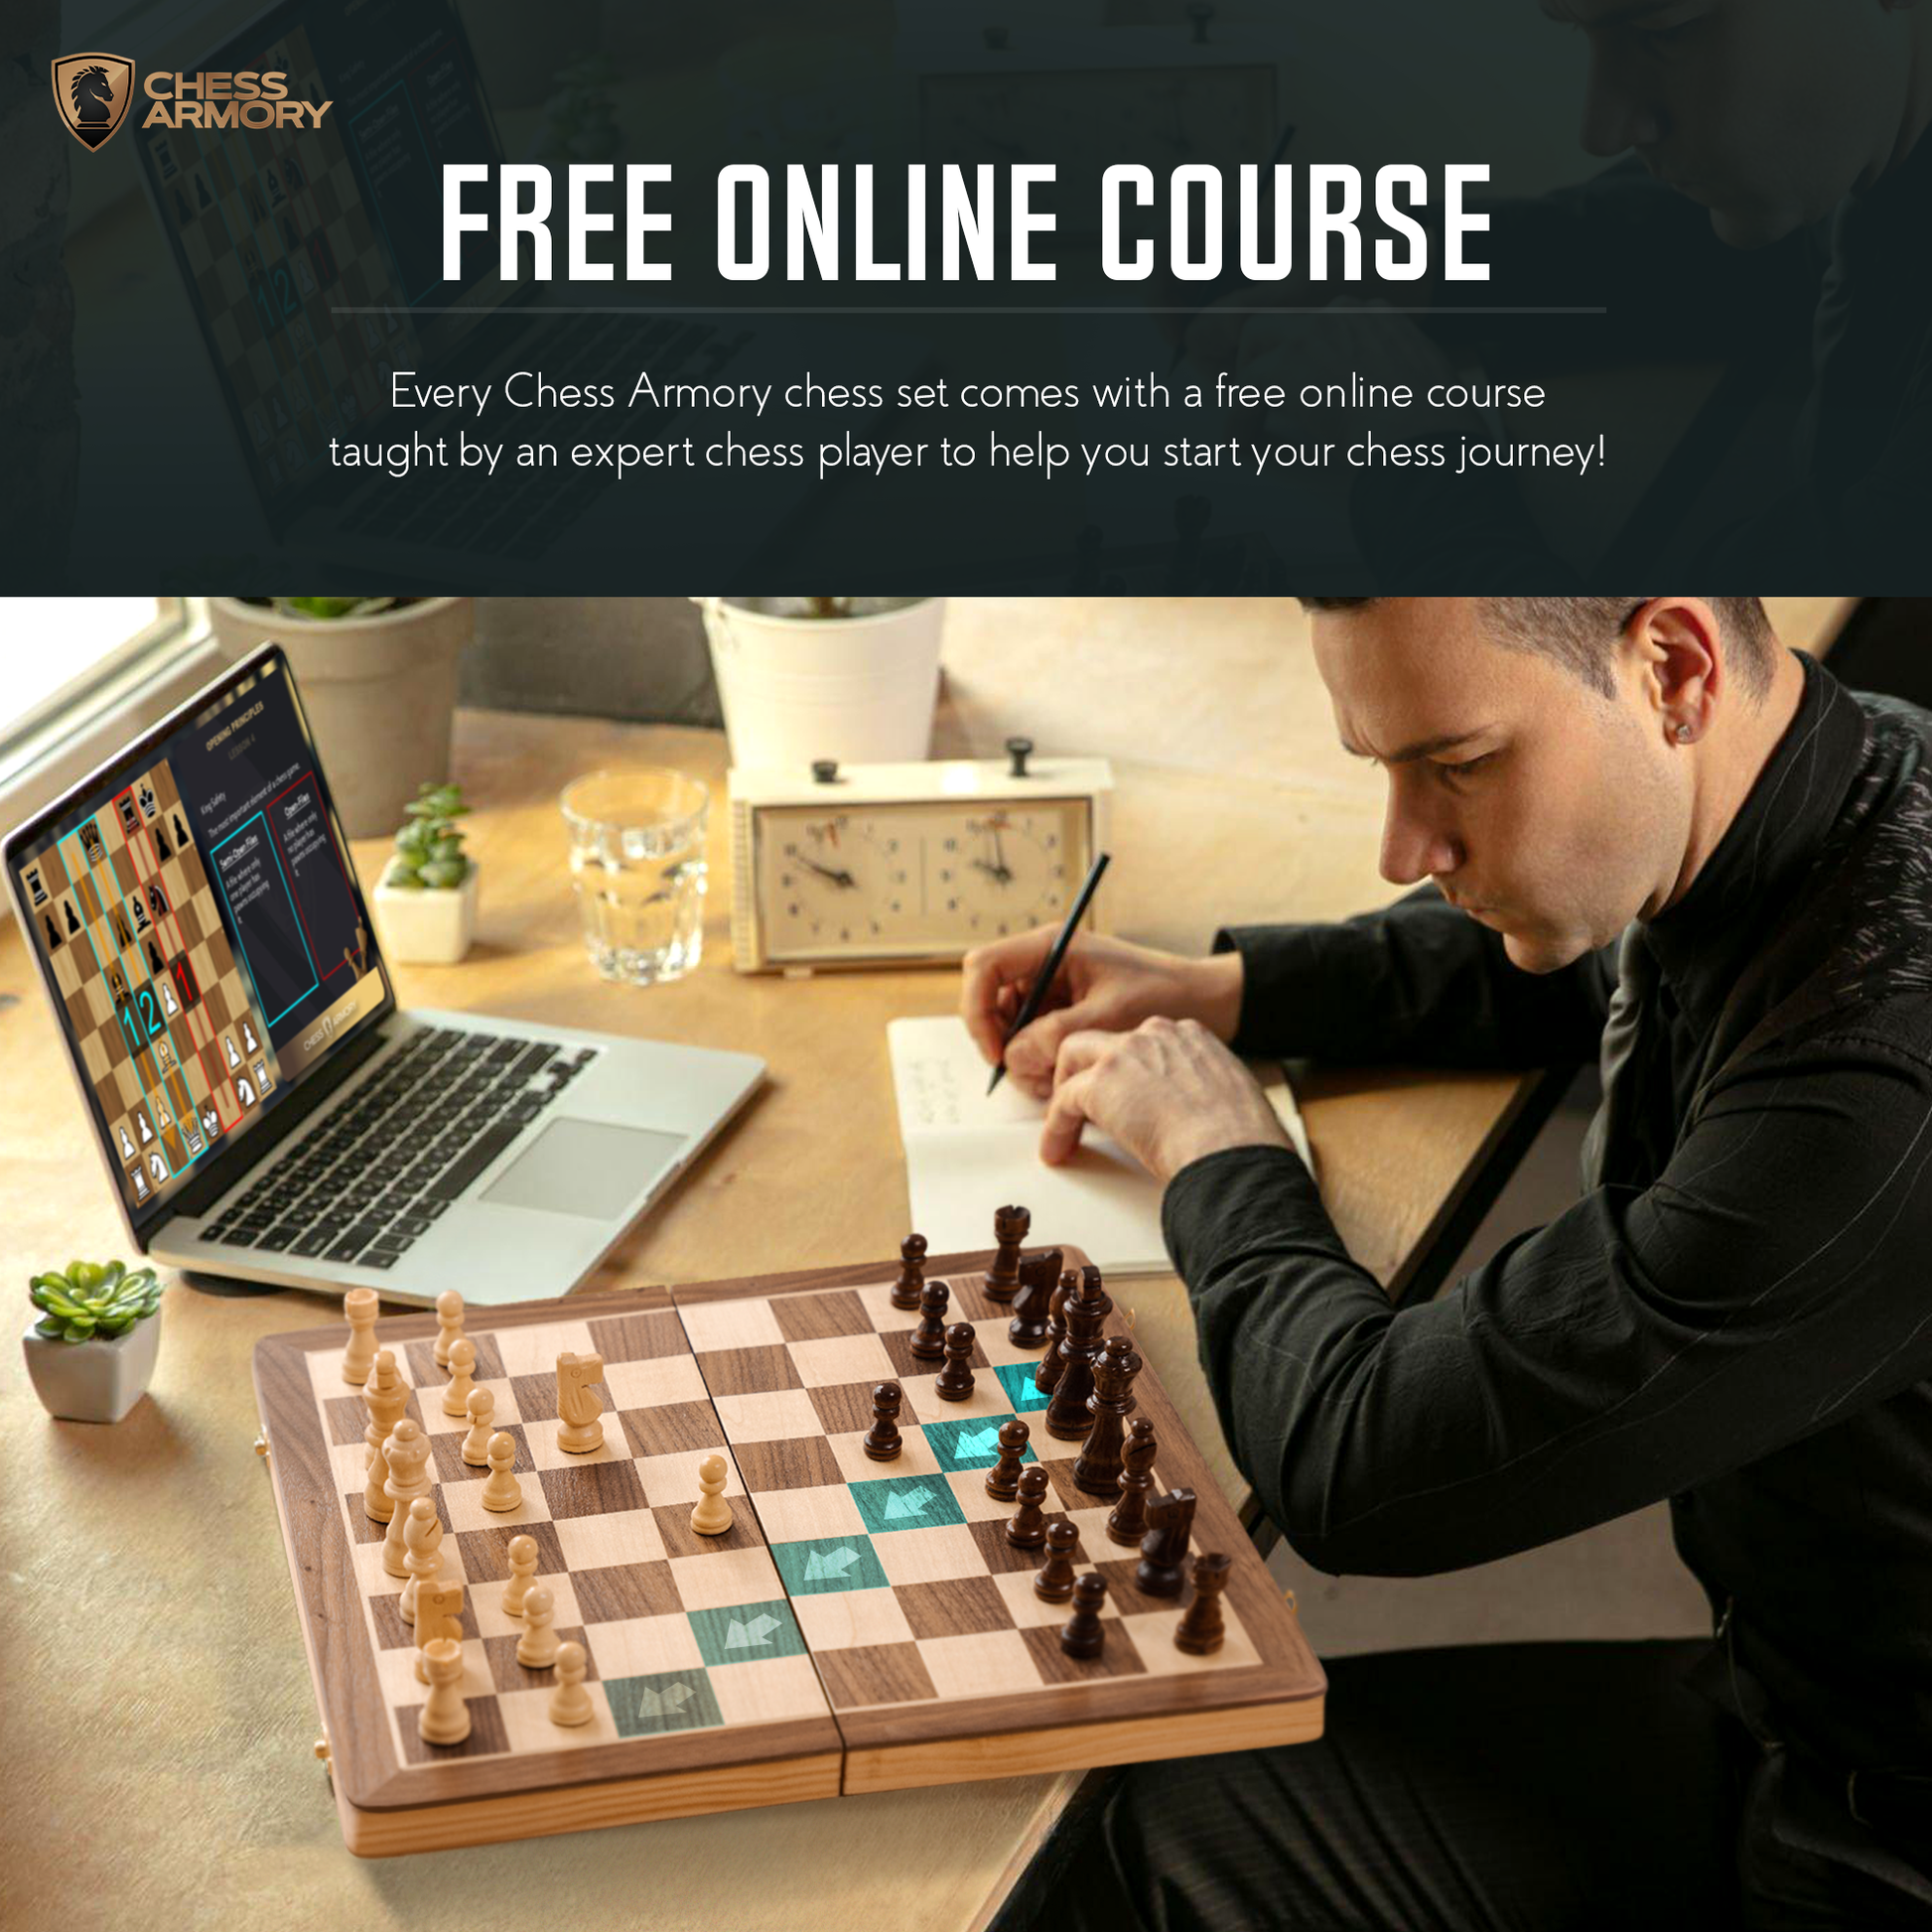 The Expert Wooden Chess Pieces